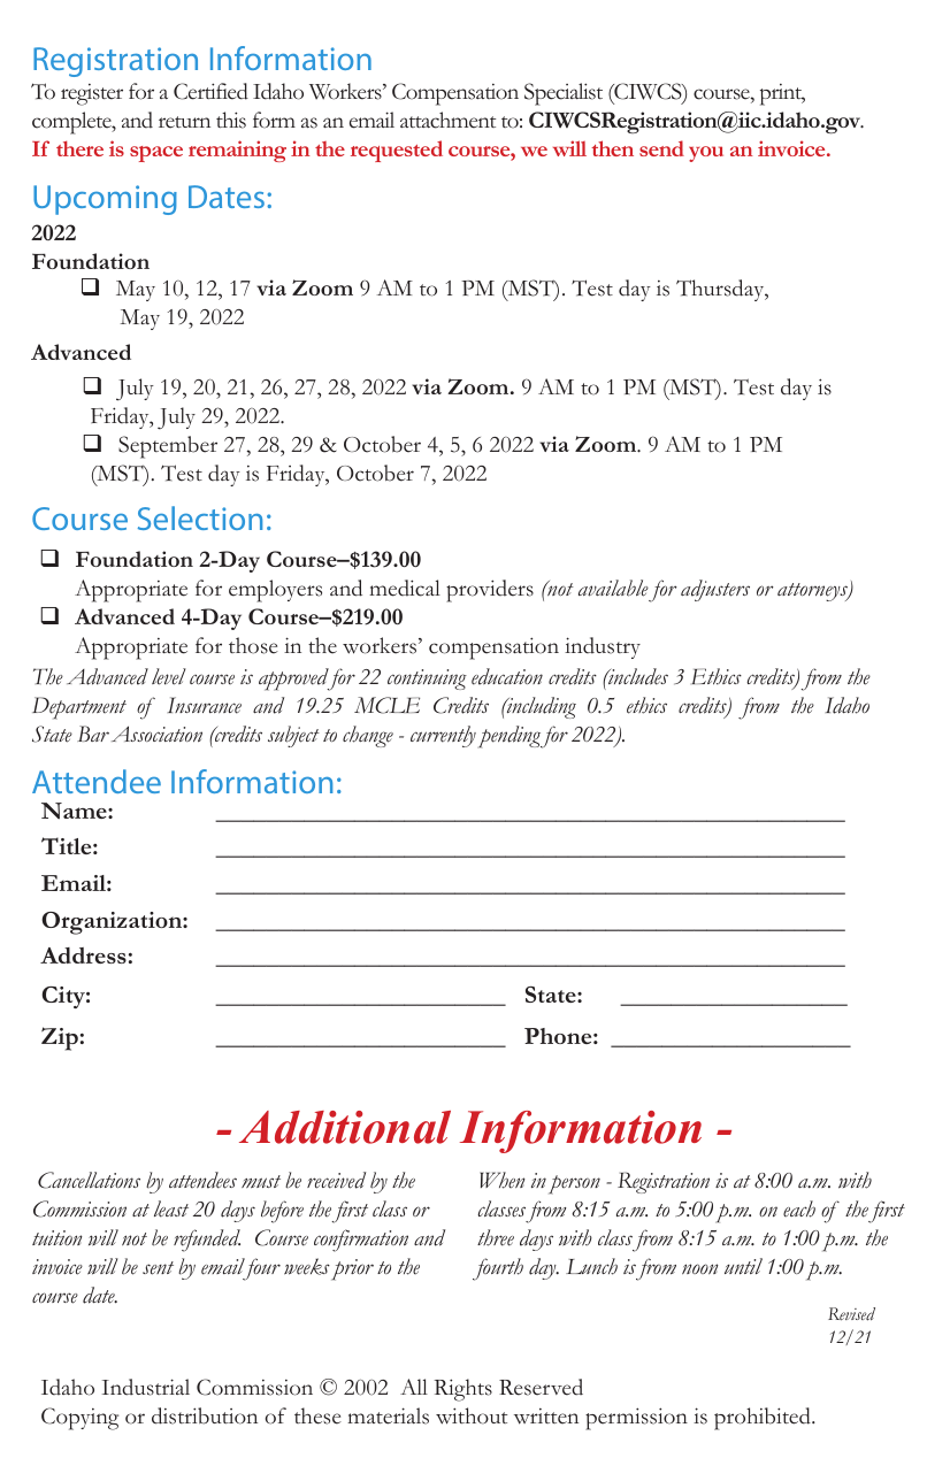 Certified Idaho Workers Compensation Specialist (Ciwcs) Registration Form - Idaho, Page 1